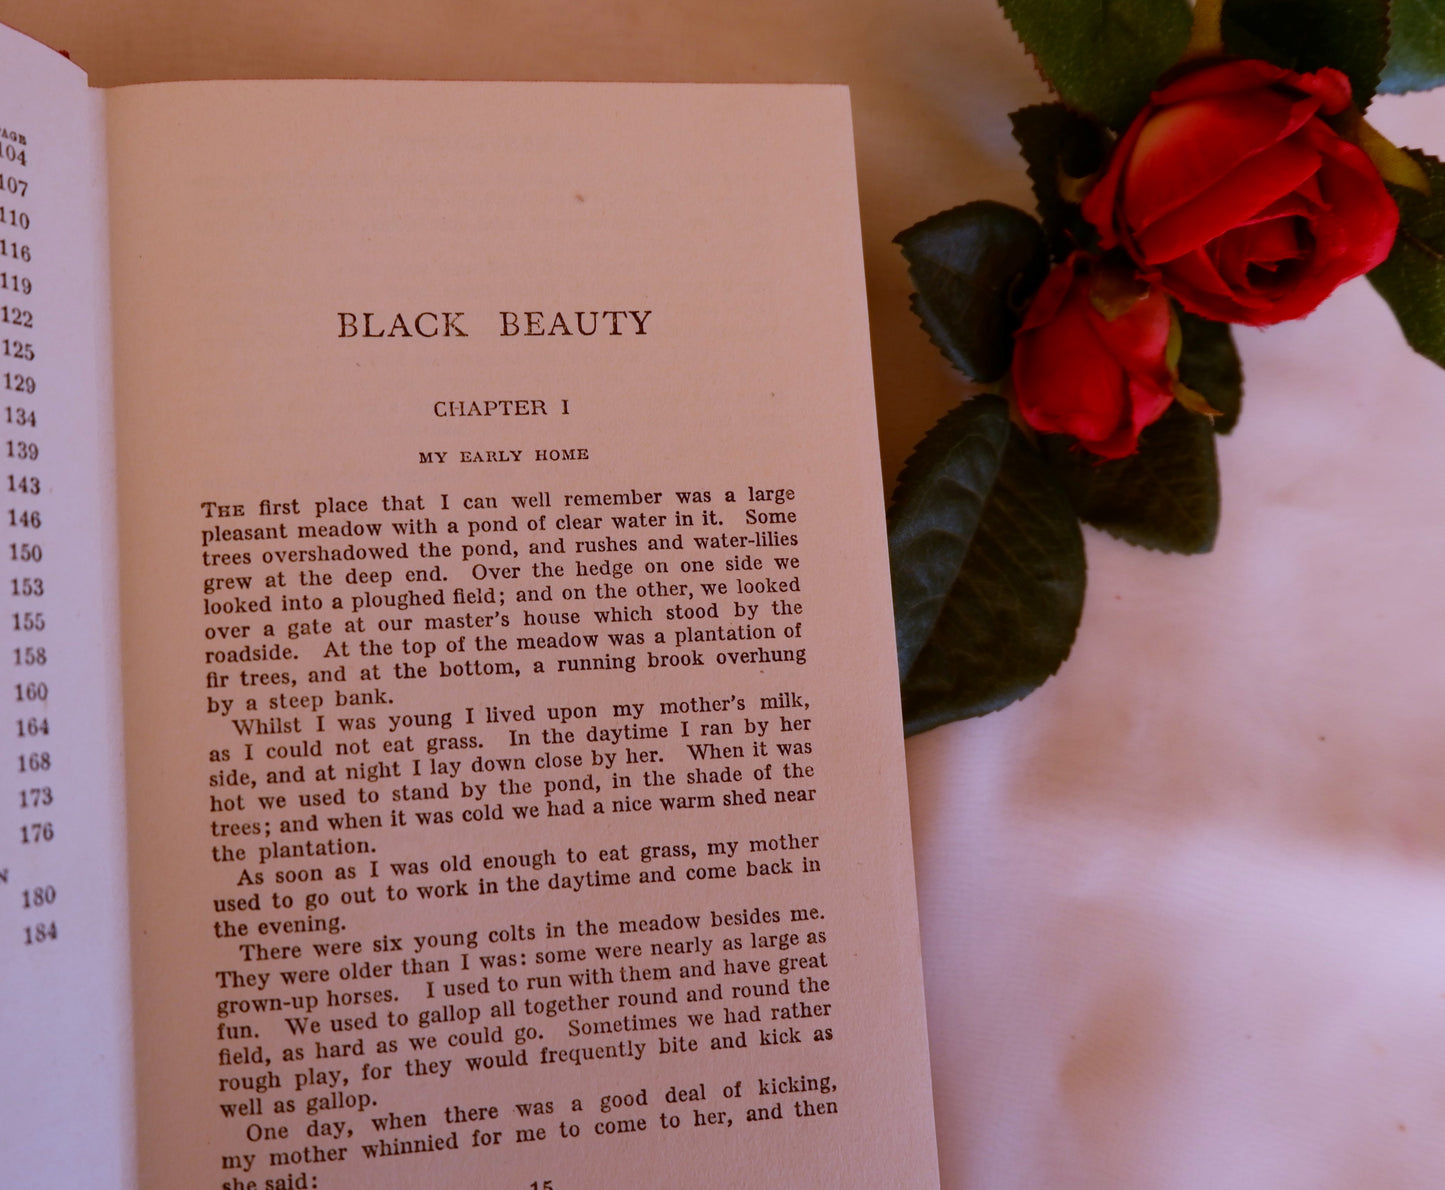 Black Beauty by Anna Sewell and Also Stories From The Arabian Nights / 1930s Odhams Press, / Excellent Condition Vintage Book